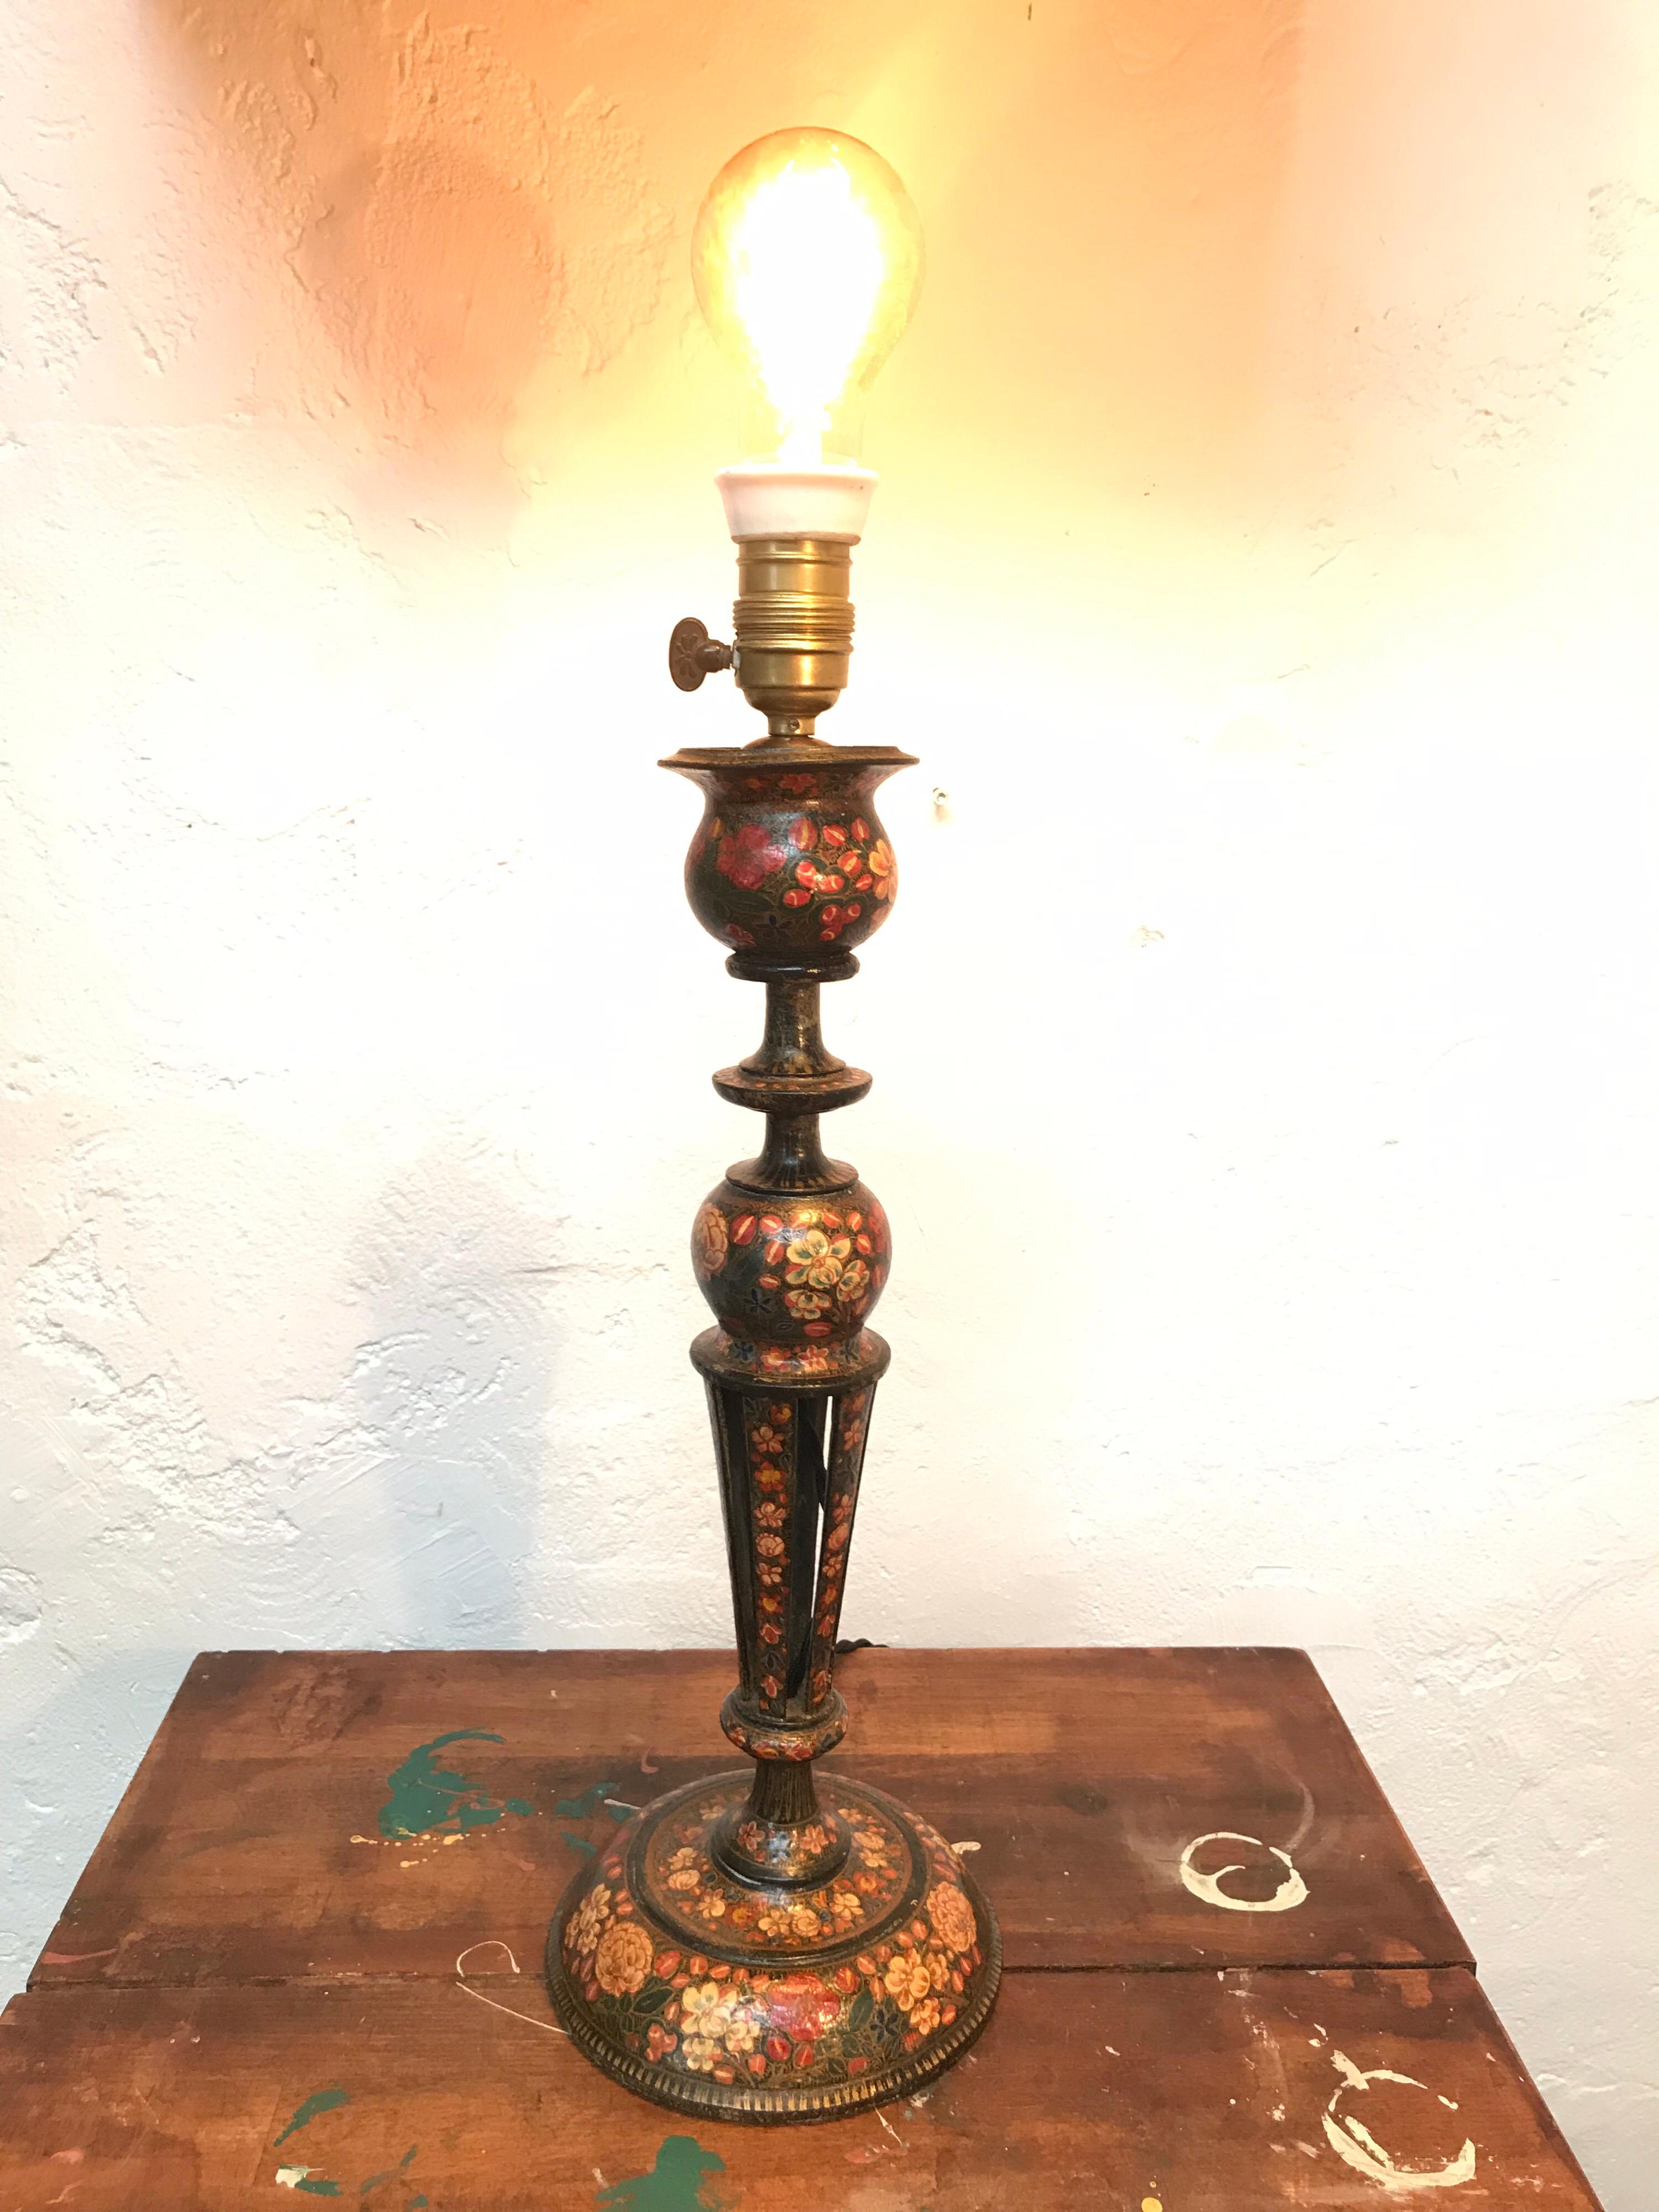 Gorgeous antique papier-mâché gypsy table lamp.
Most probably Italian and beautifully decorated with hand painted flowers.
Rewired and included with the lamp is an antique carbon filament bulb in working condition.

Great English country house